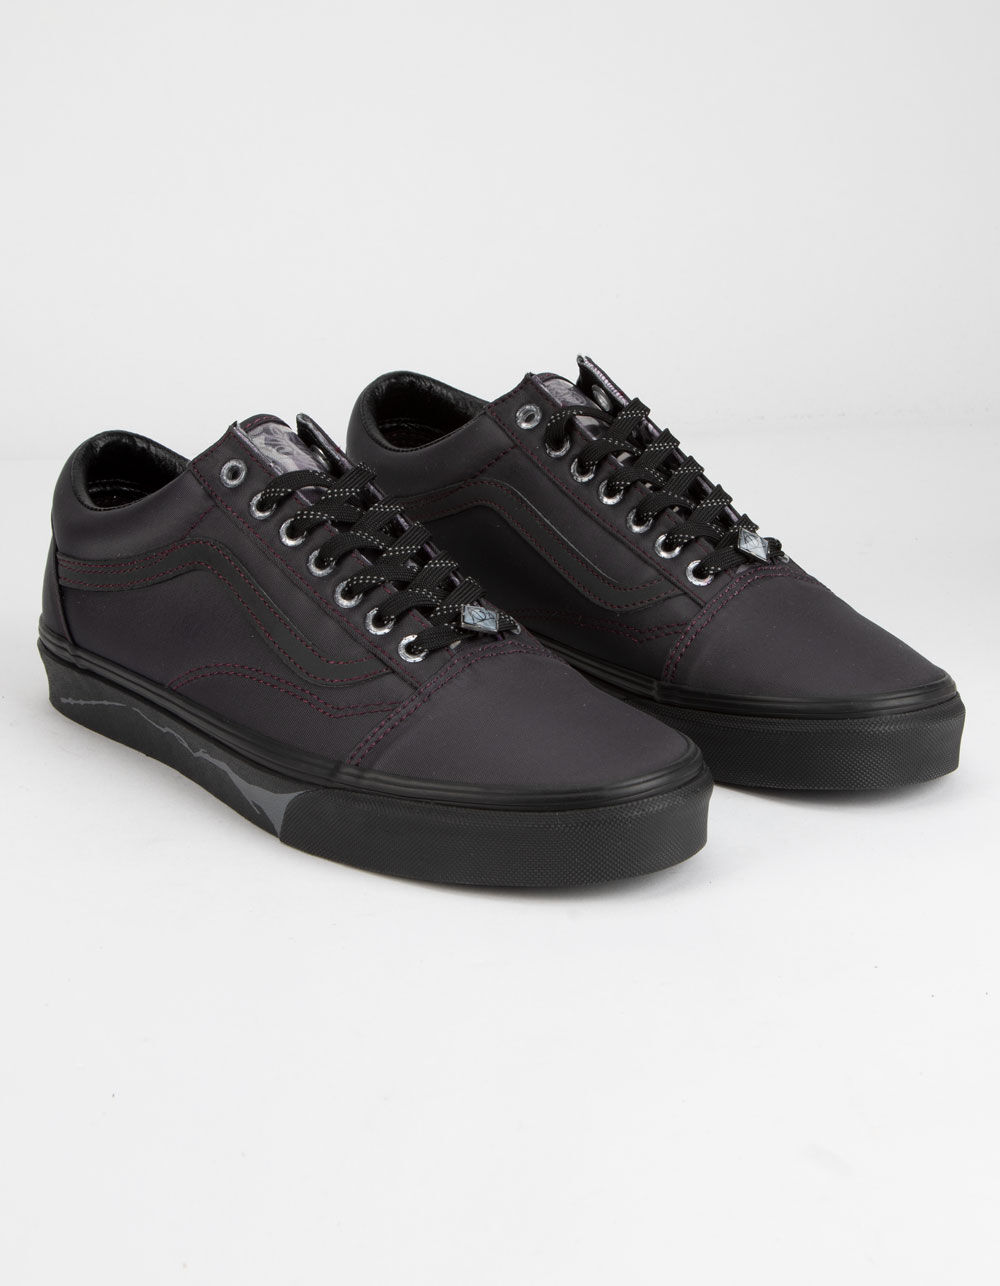 x Harry Potter Deathly Hallows Old Skool Shoes - DEATHLY HALLOWS/BLACK Tillys